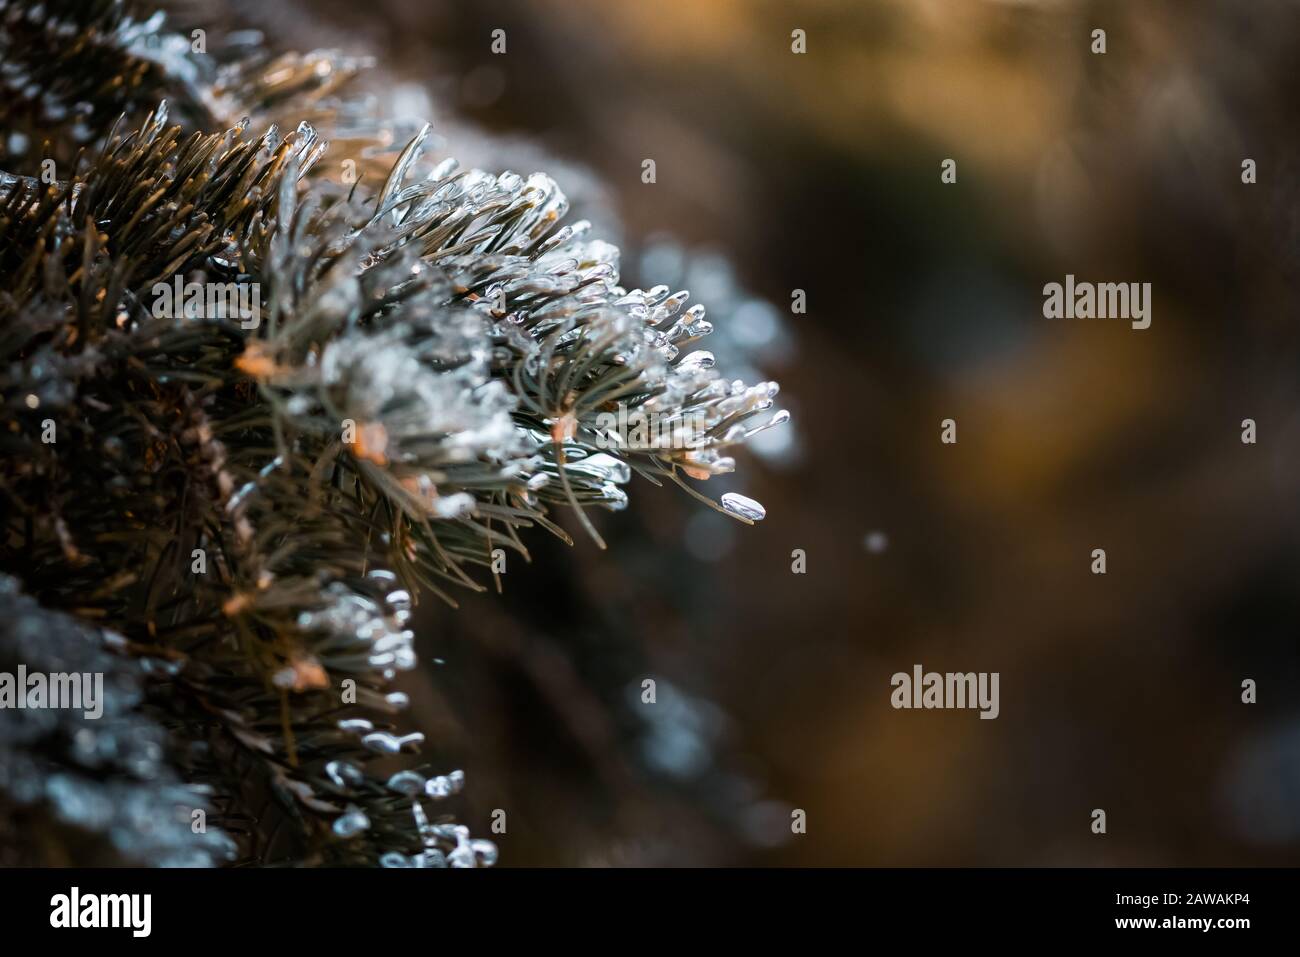 ice crystal balancing on a pine needle of a pine tree outside Stock Photo